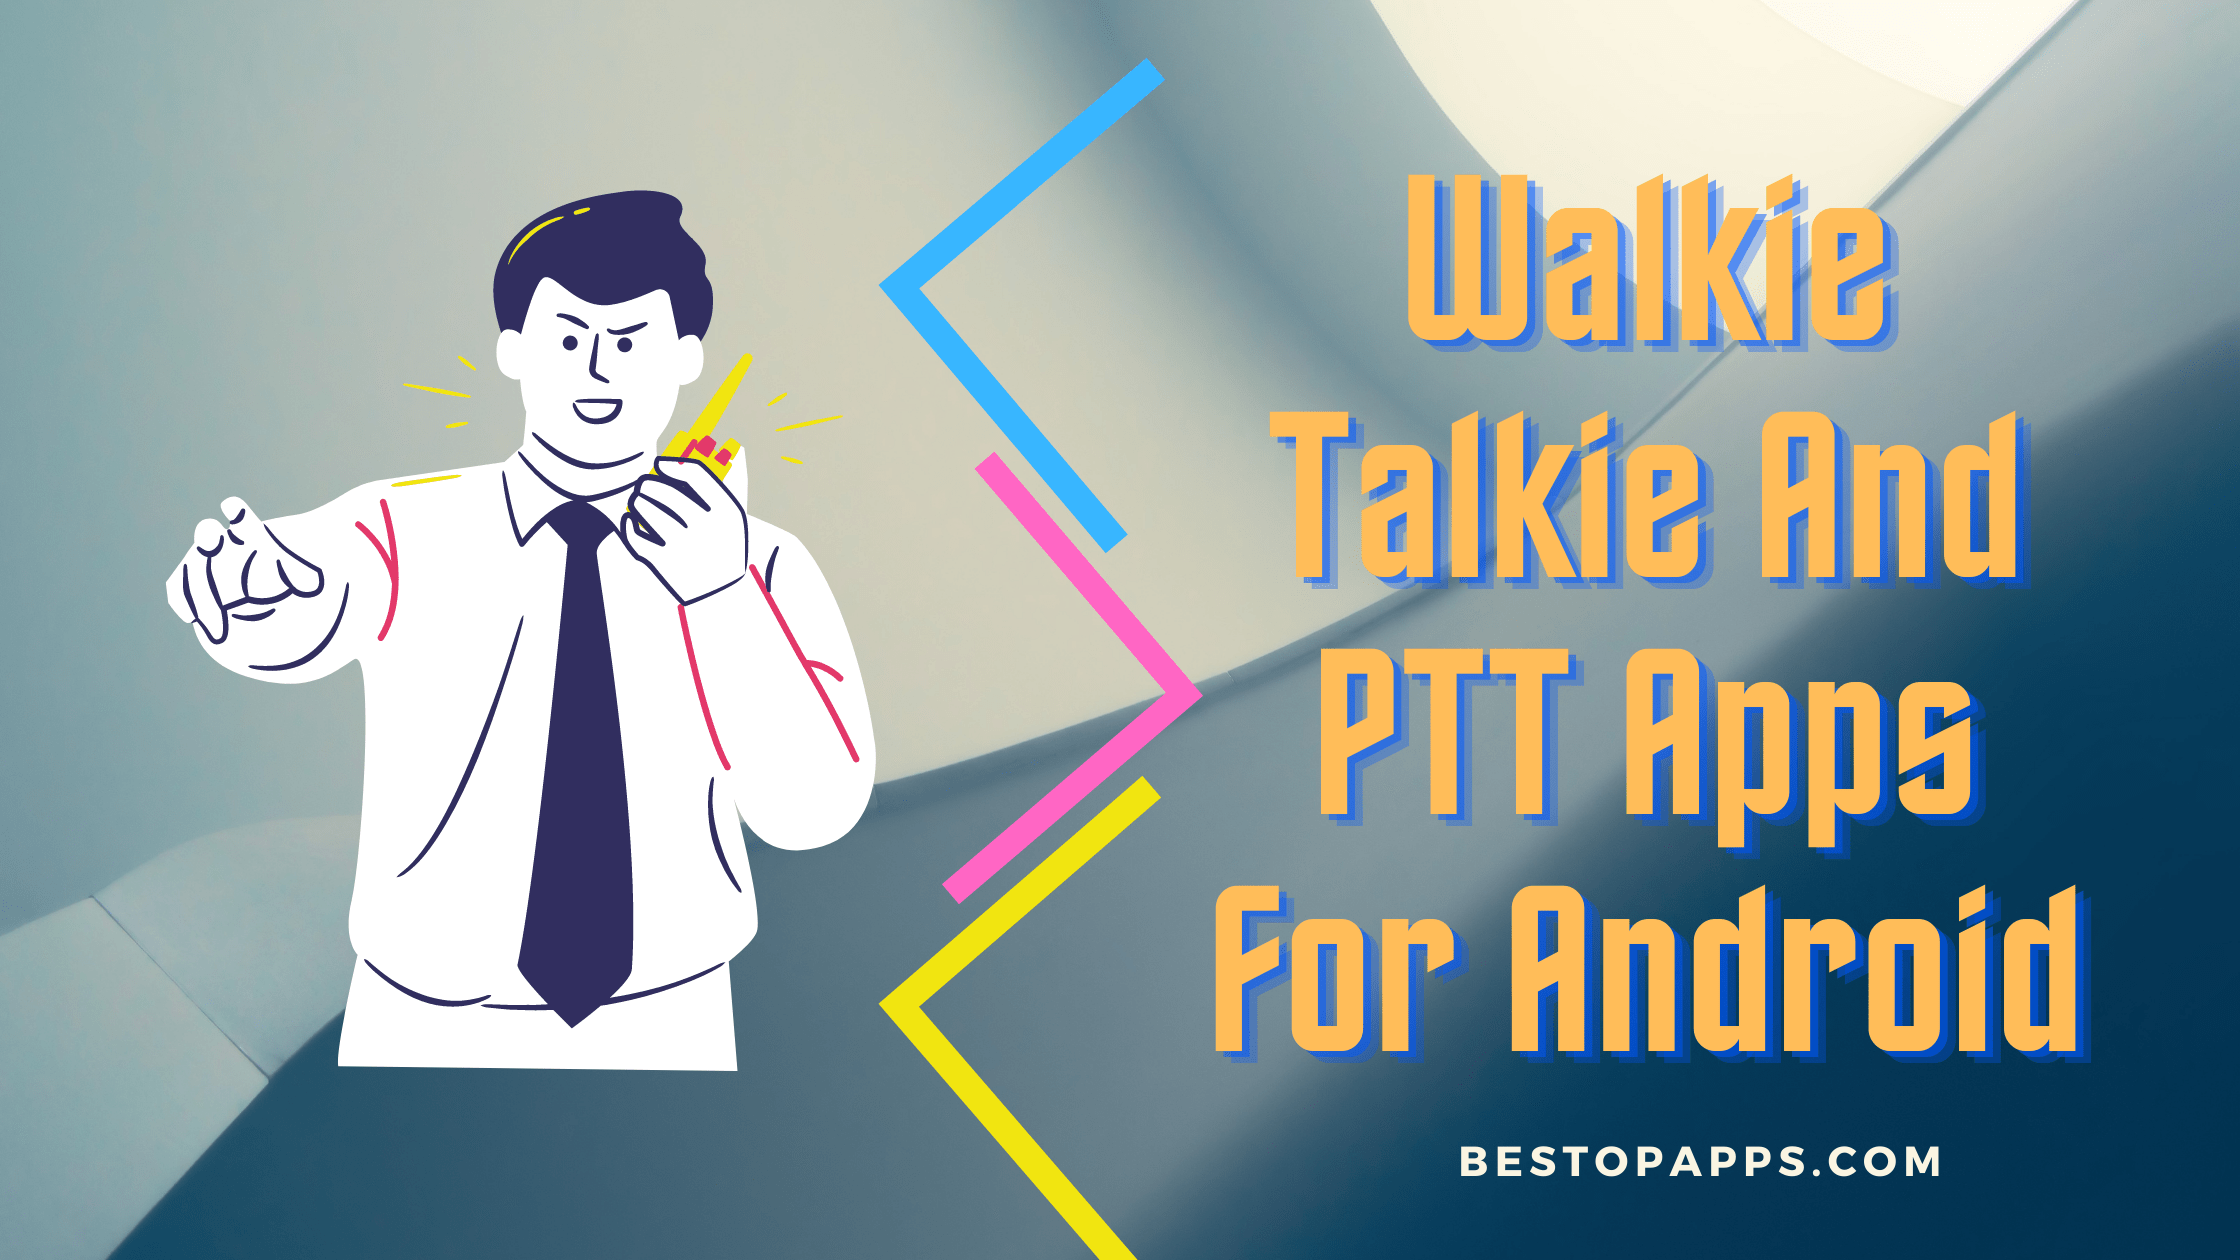 Walkie Talkie And PTT Apps For Android